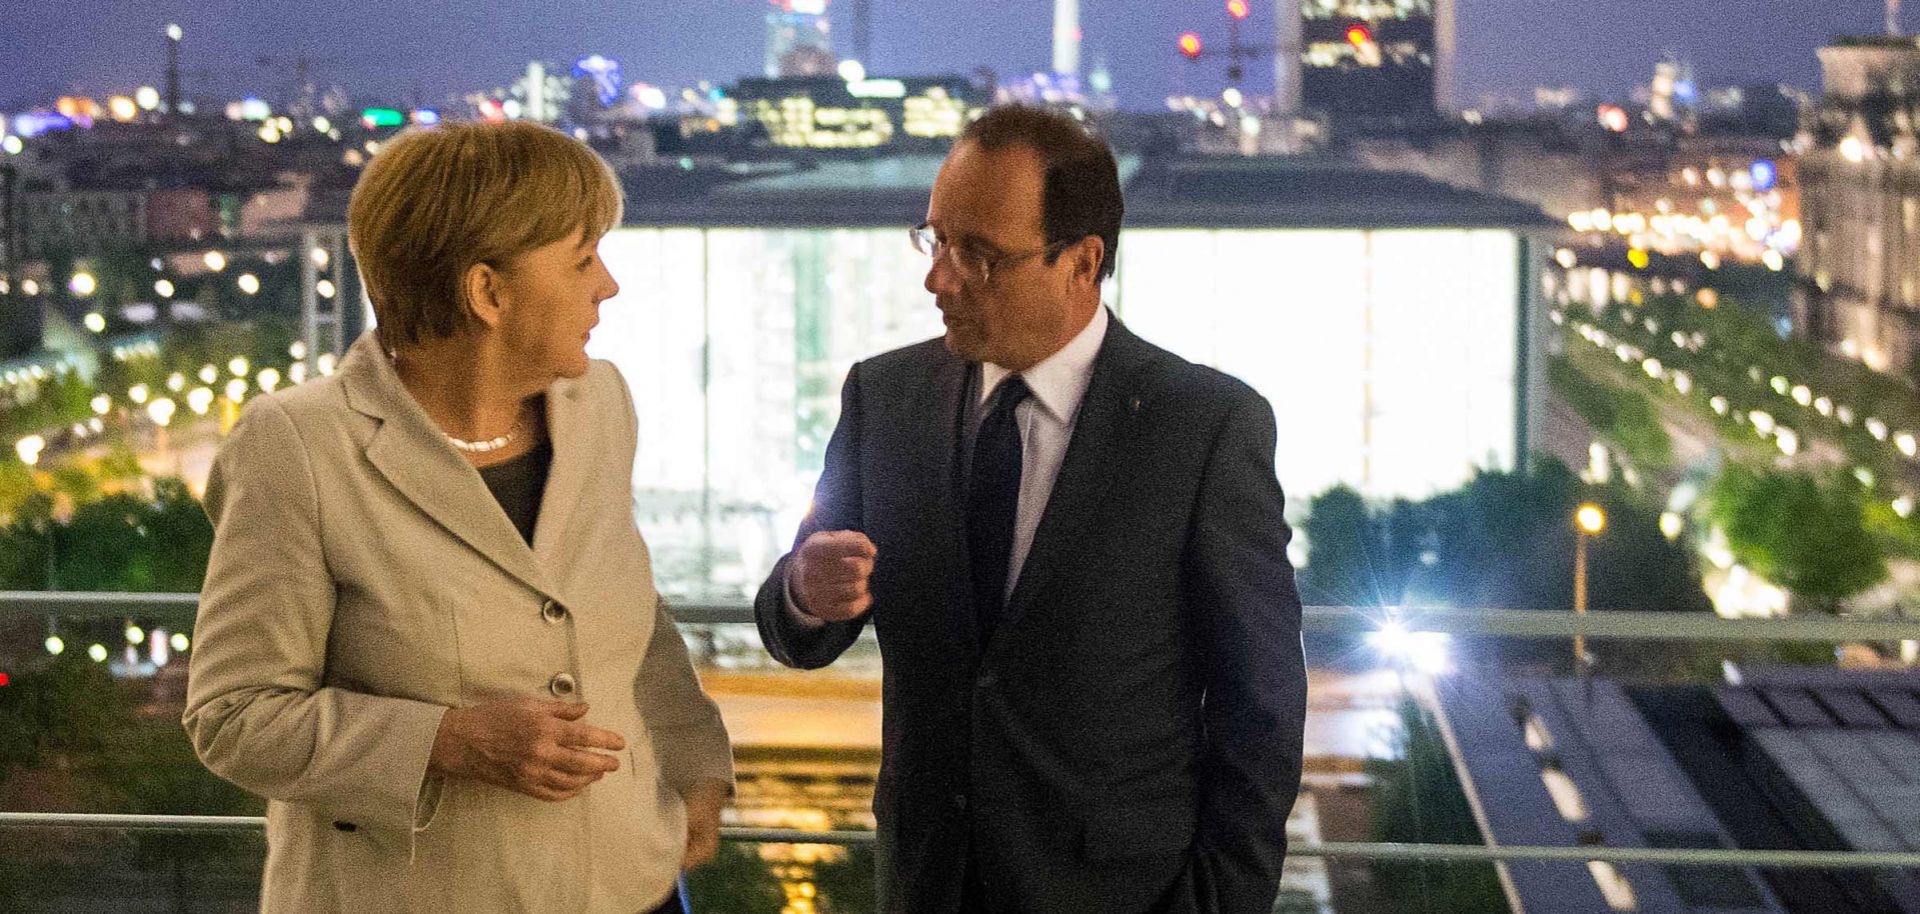 France is trying to maintain its dominance in European affairs at a time of German ascendance.